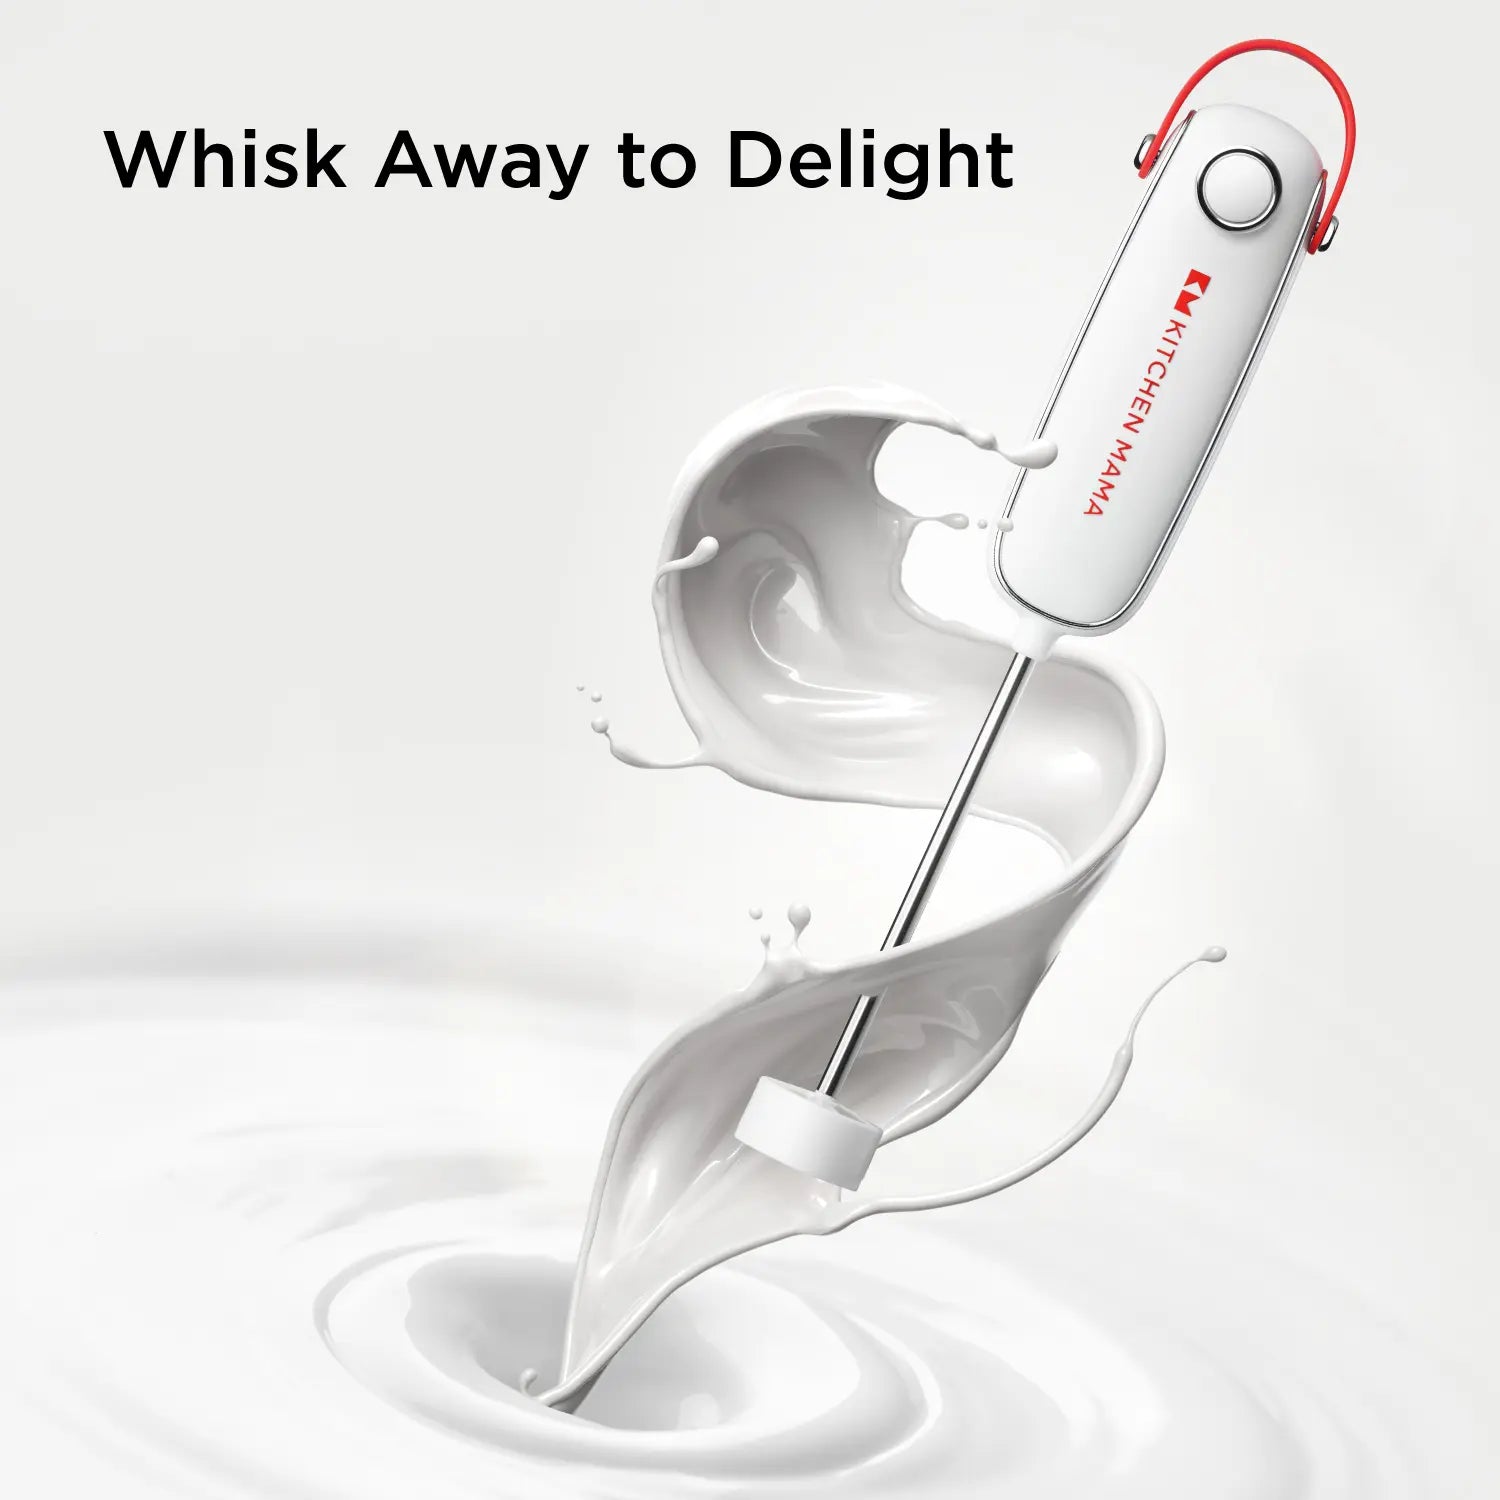 Silkwhisk Electric Milk Frother, Your Companion for Flavorful Journey, Kitchen Mama, Red, Teal, Metal Gray, Flow-Mixing fluffy frother, whisk away to delight, Mini Drink Mixer, Cold Foam Maker, Frother Wand, Coffee, Cappuccino, Protein Powder Drinks, Matcha